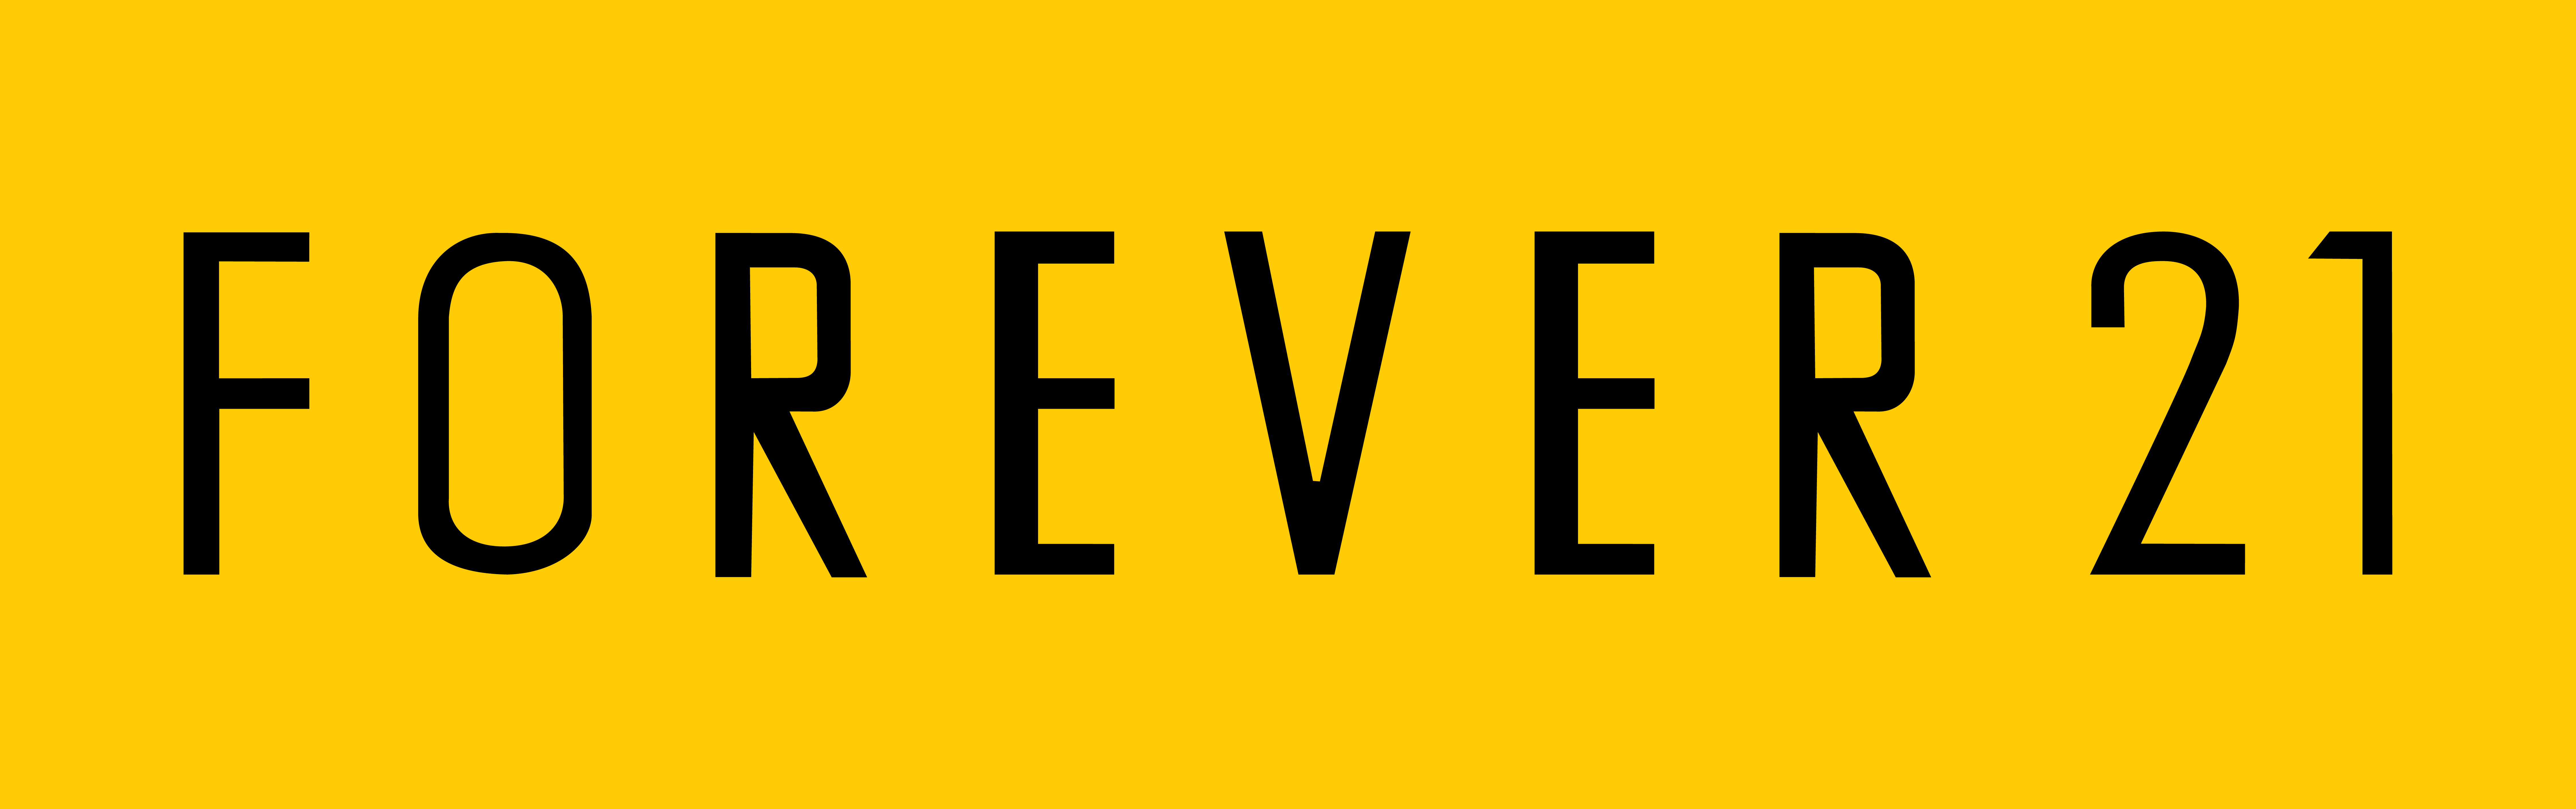 Forever 21 Logo Png Hdpng.com 9000 - Forever 21, Transparent background PNG HD thumbnail